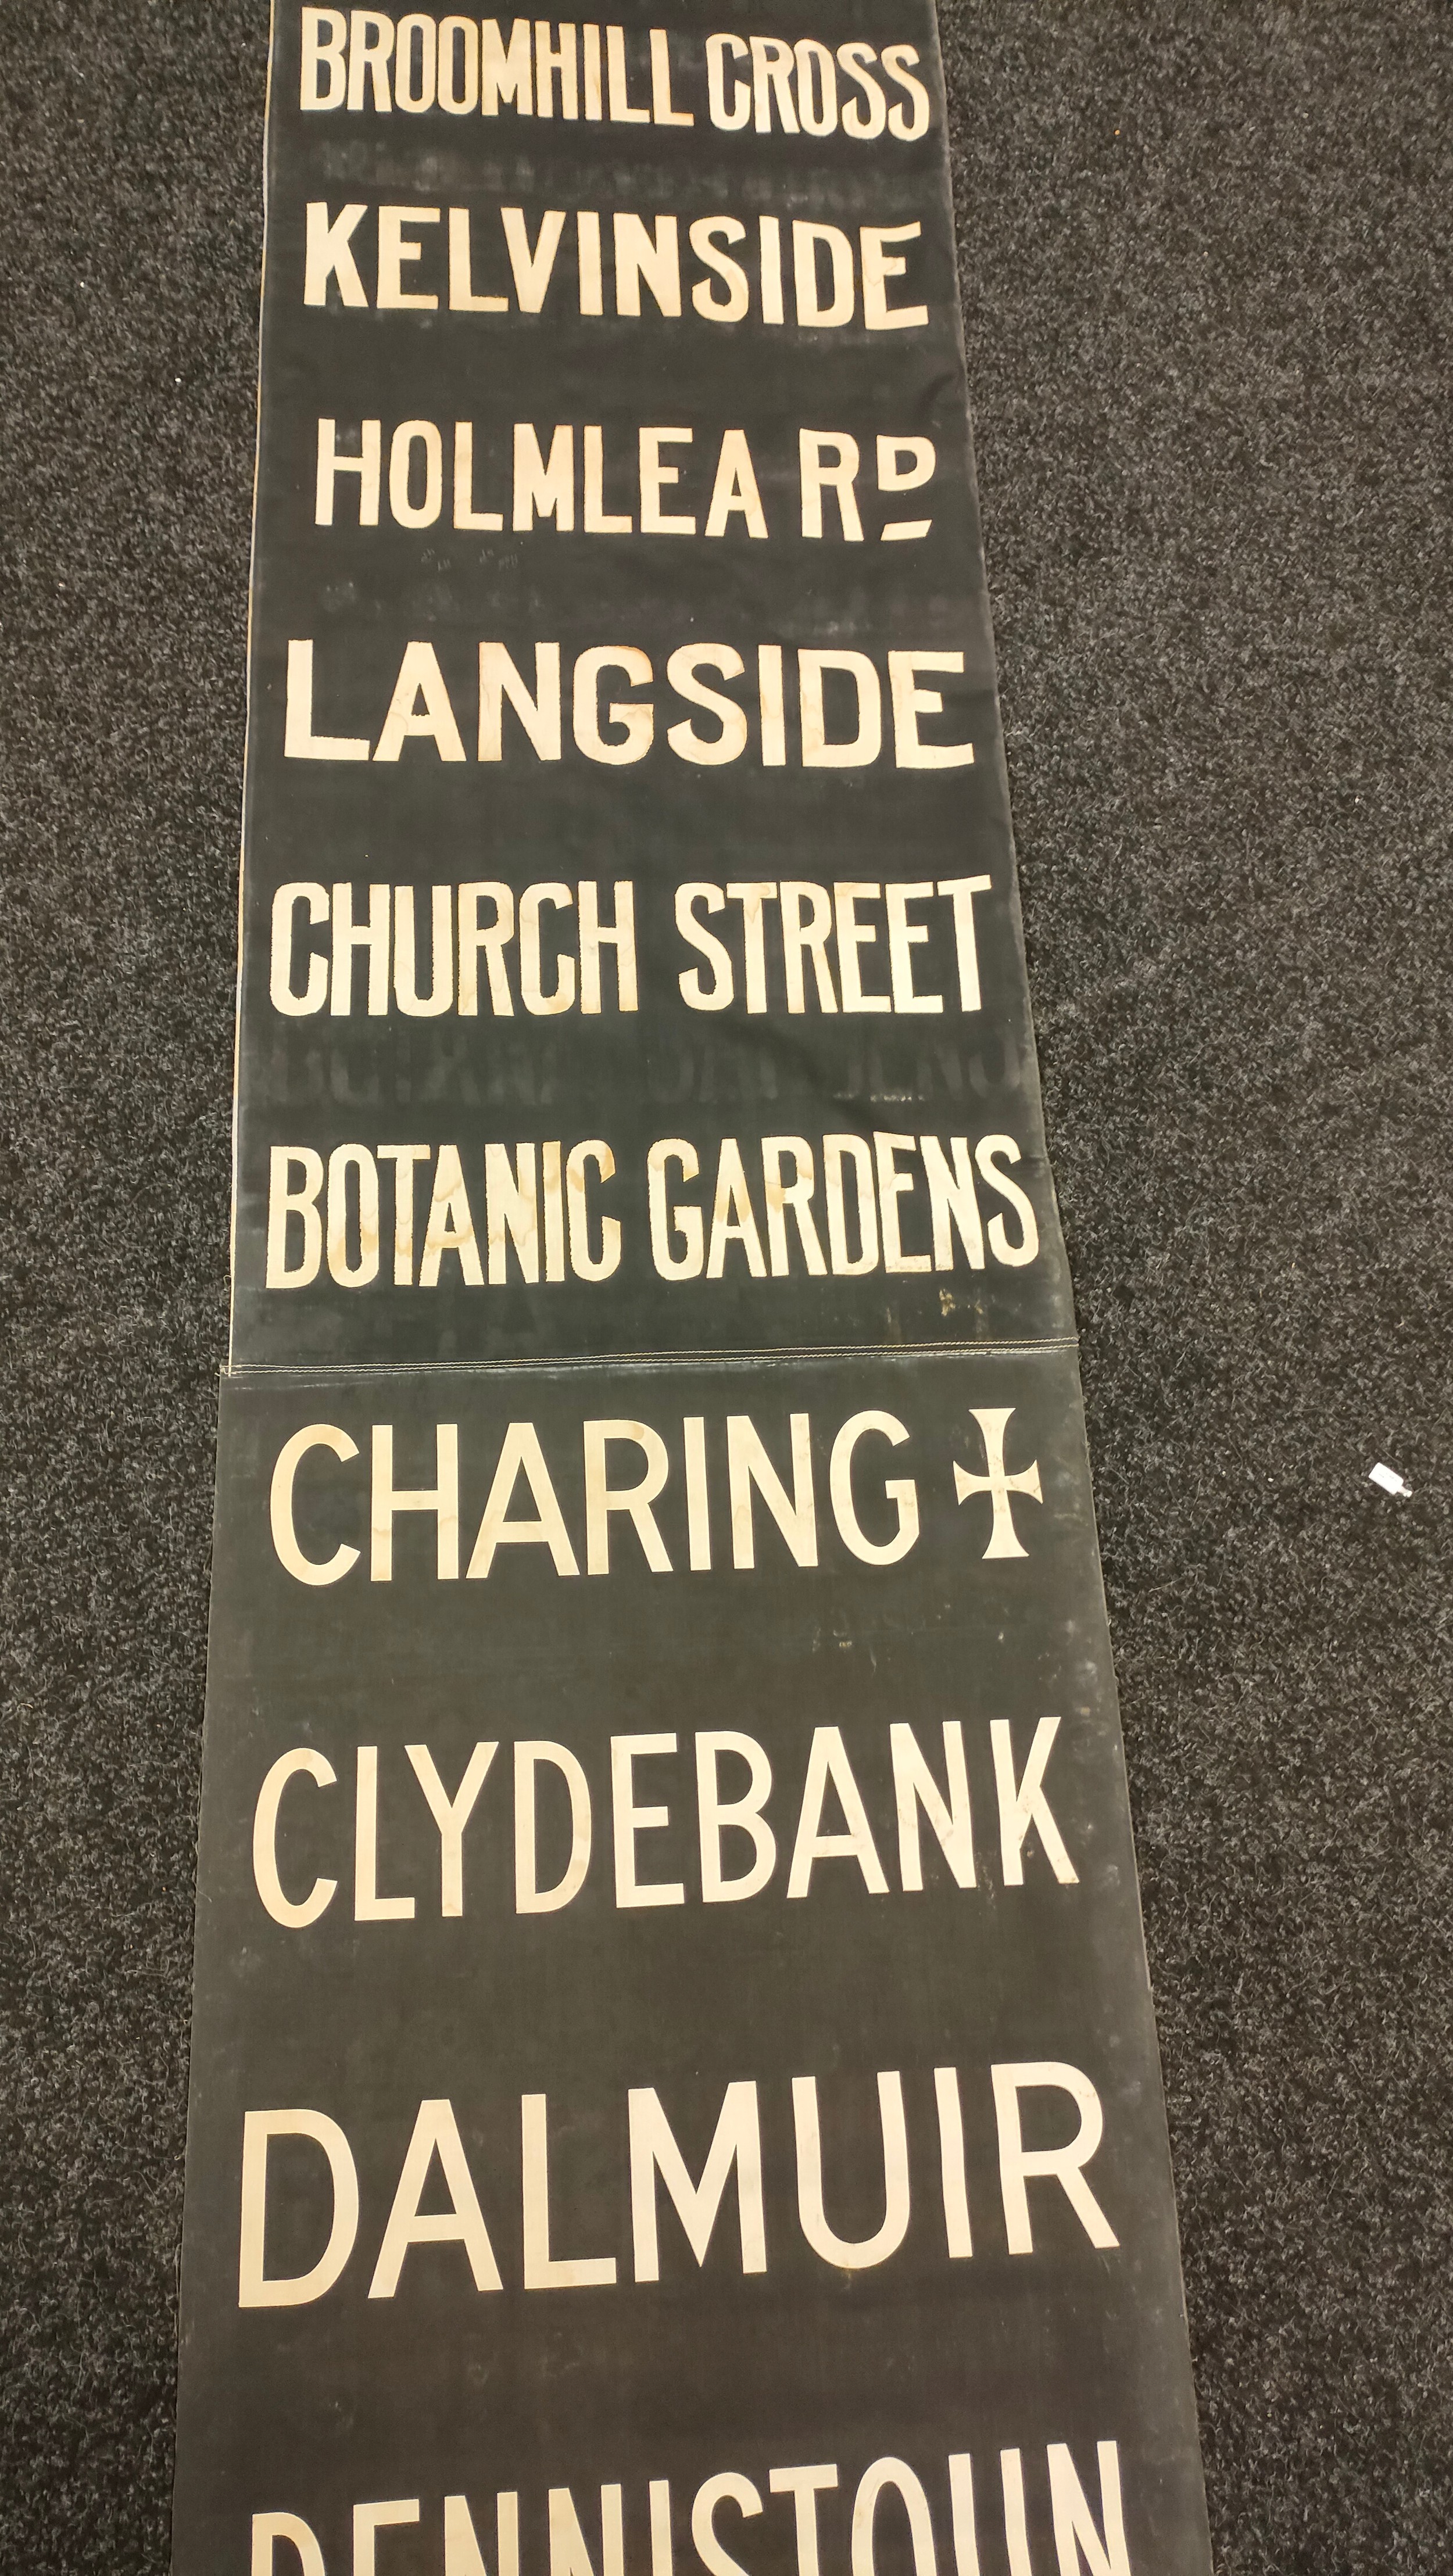 Antique Glasgow Bus advertising street name banner [1340x65] - Image 6 of 7